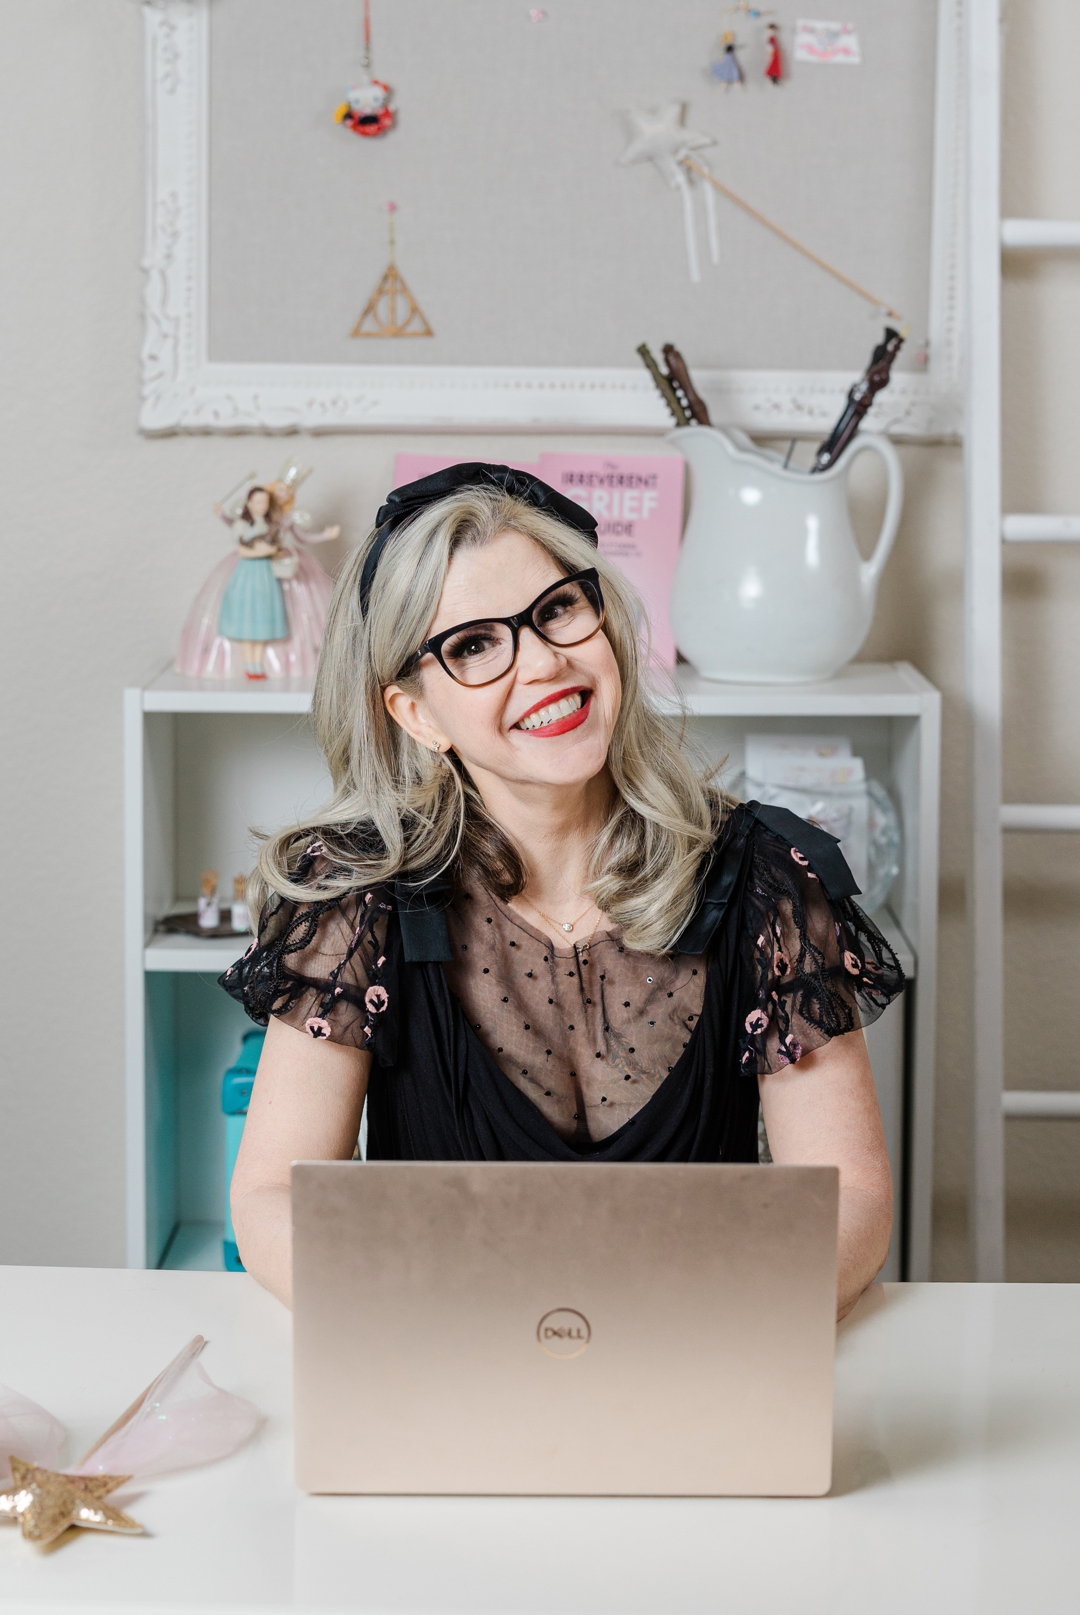 Dallas Therapist Headshot Photographer; Smiling, caucasian woman wearing a black blouse, black glasses, and a black headband sitting behind a laptop and a magic wand